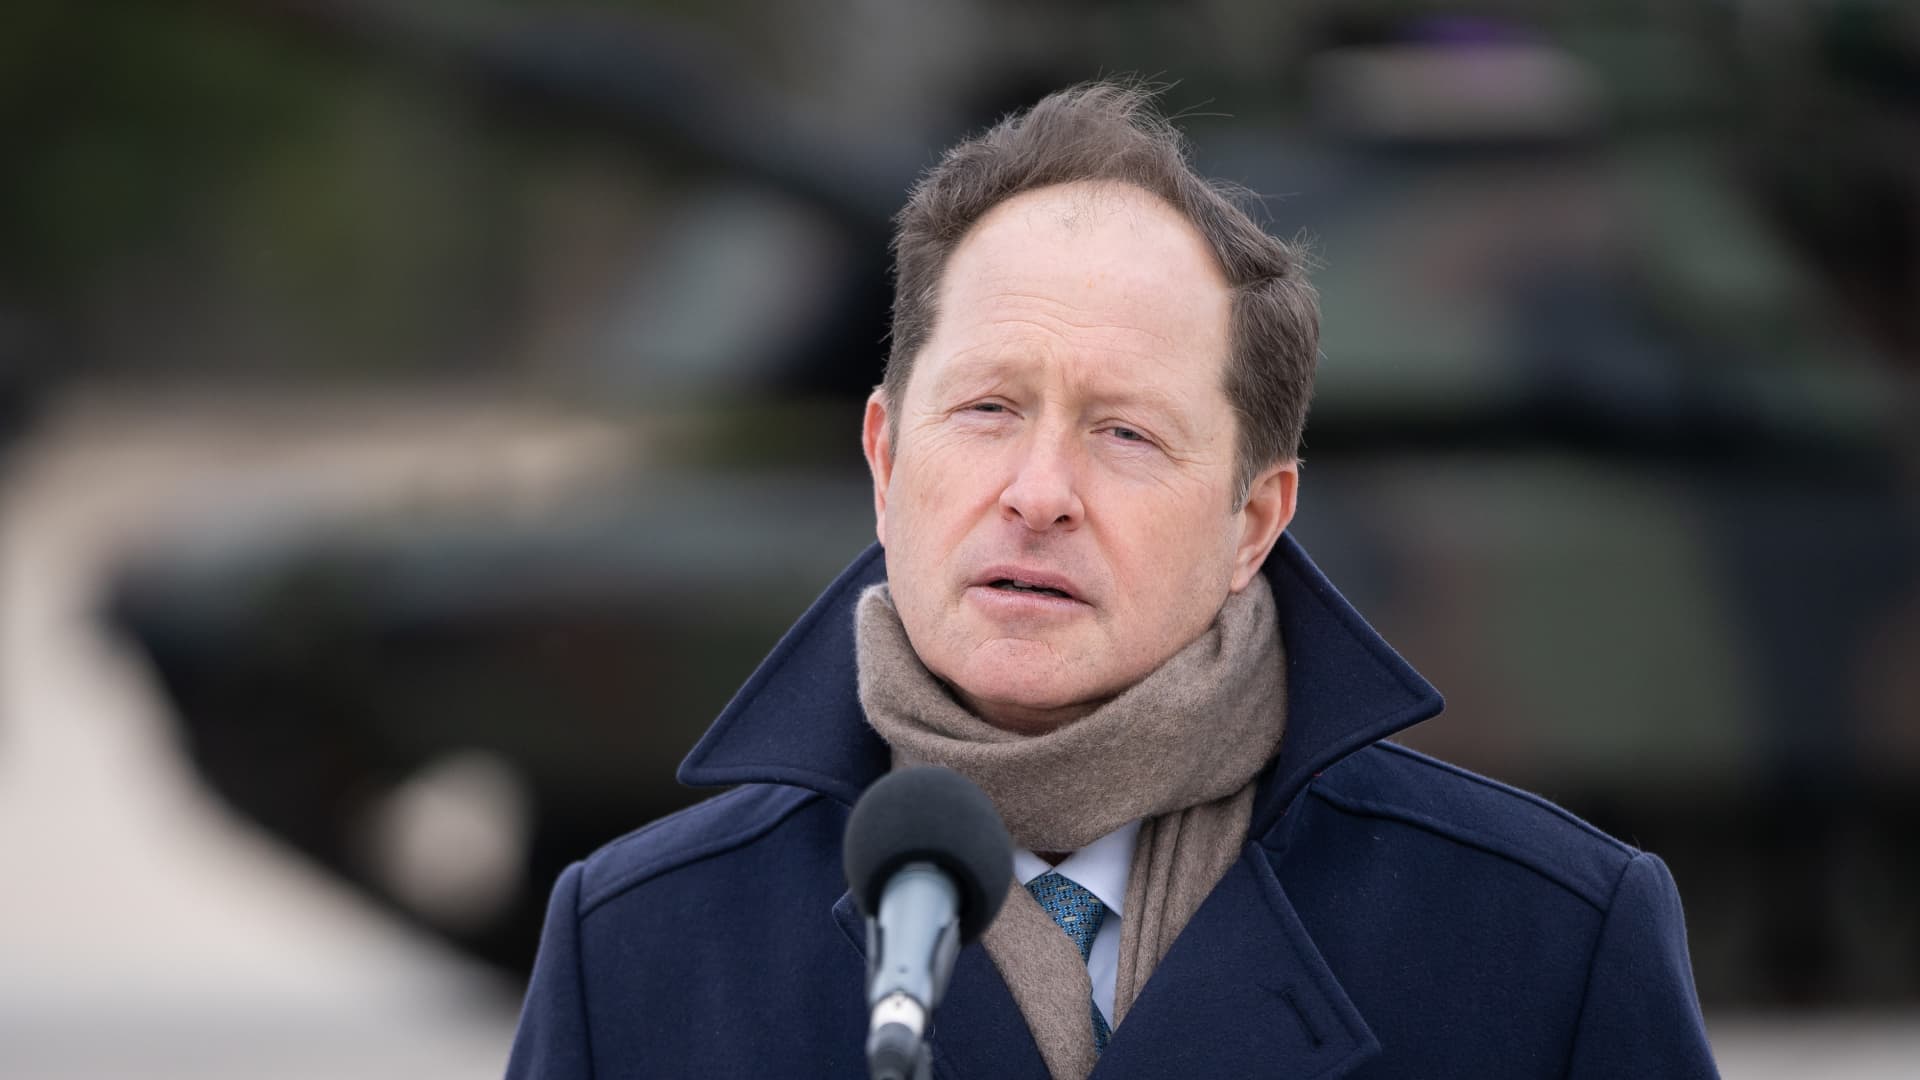 US Ambassador to Poland Mark Brzezinski during the ceremony of signing the contract for the purchase of 250 Abrams tanks for the Polish Army in the 1st Warsaw Armored Brigade in Wesola near Warsaw, Poland on April 5,2022 (Photo by Mateusz Wlodarczyk/NurPhoto via Getty Images)